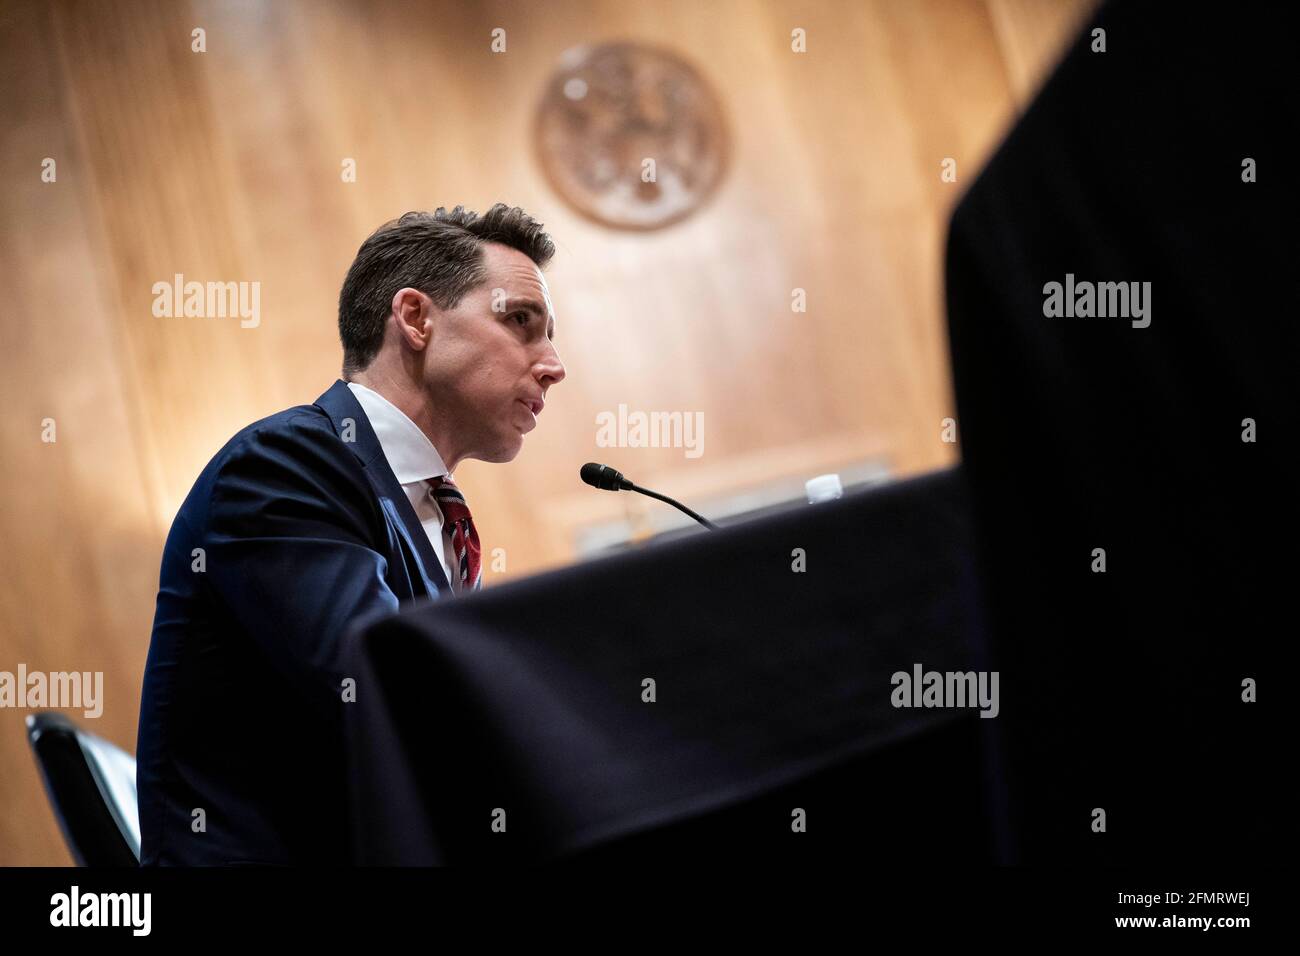 United States Senator Josh Hawley (Republican of Missouri), speaks during a Senate Homeland Security and Governmental Affairs Committee hearing in Washington, DC, U.S., on Tuesday, May 11, 2021. The hearing is titled 'Prevention, Response, and Recovery: Improving Federal Cybersecurity Post-SolarWinds.' Credit: Sarah Silbiger/Pool via CNP /MediaPunch Stock Photo